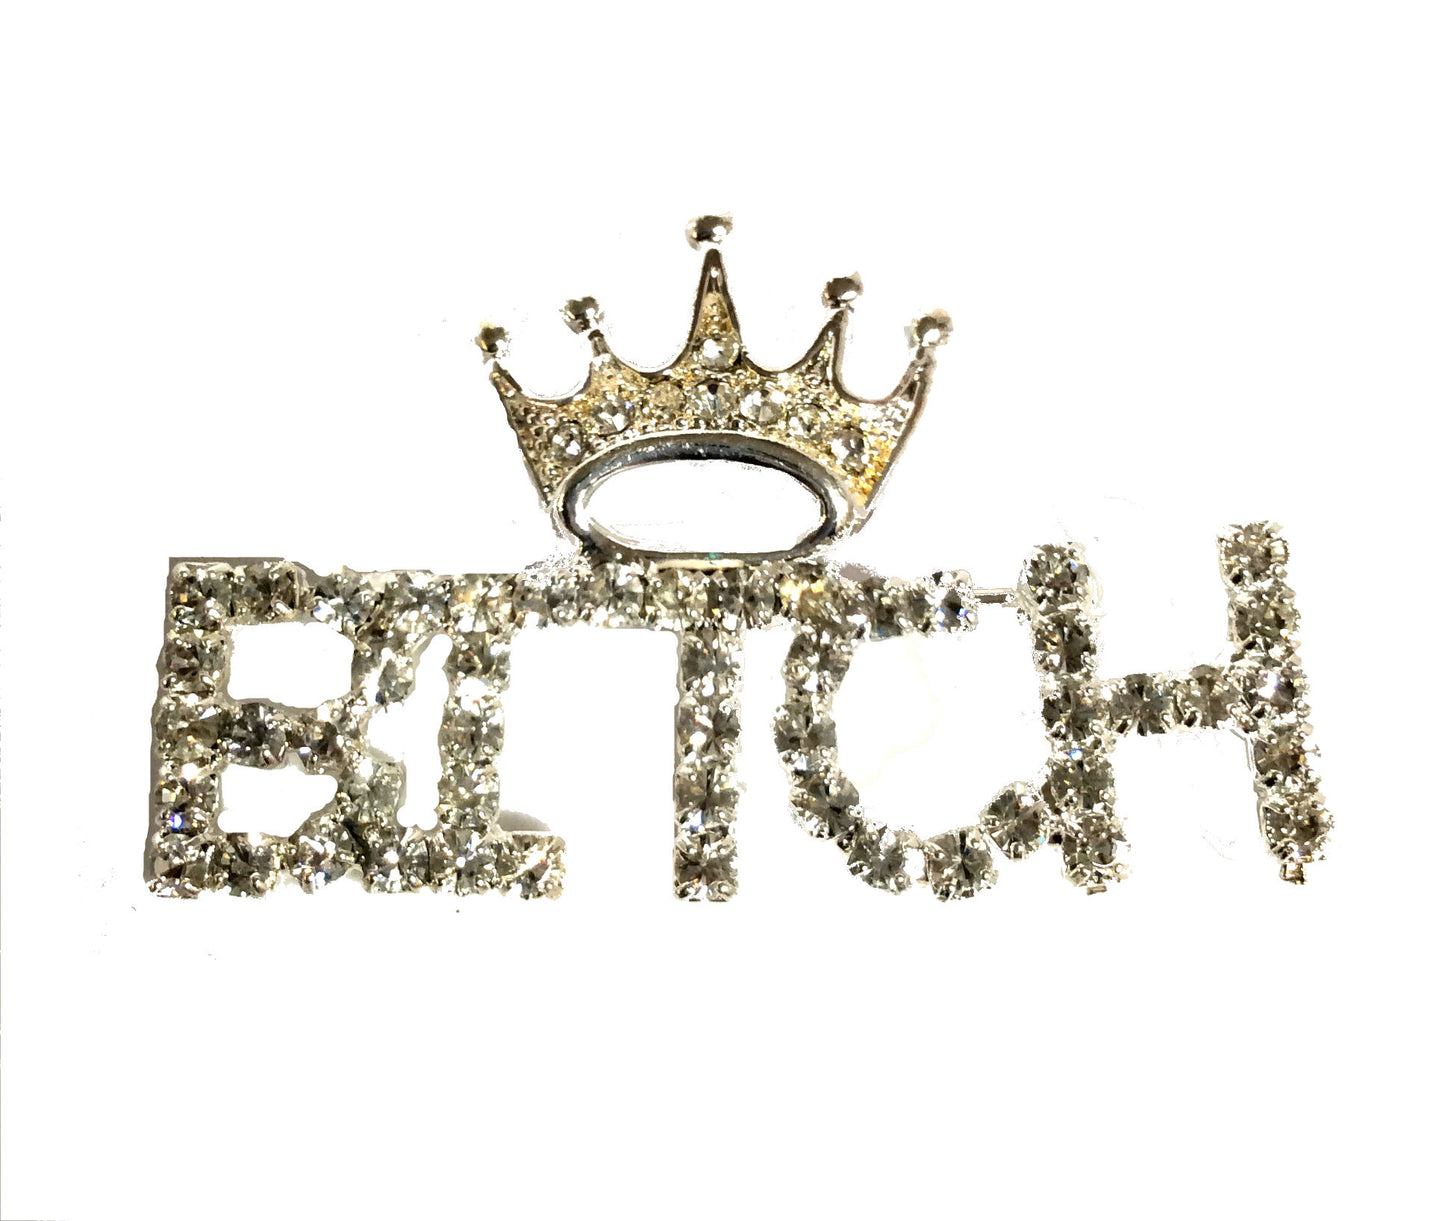 "Bitch" with crown Pin #28-3201